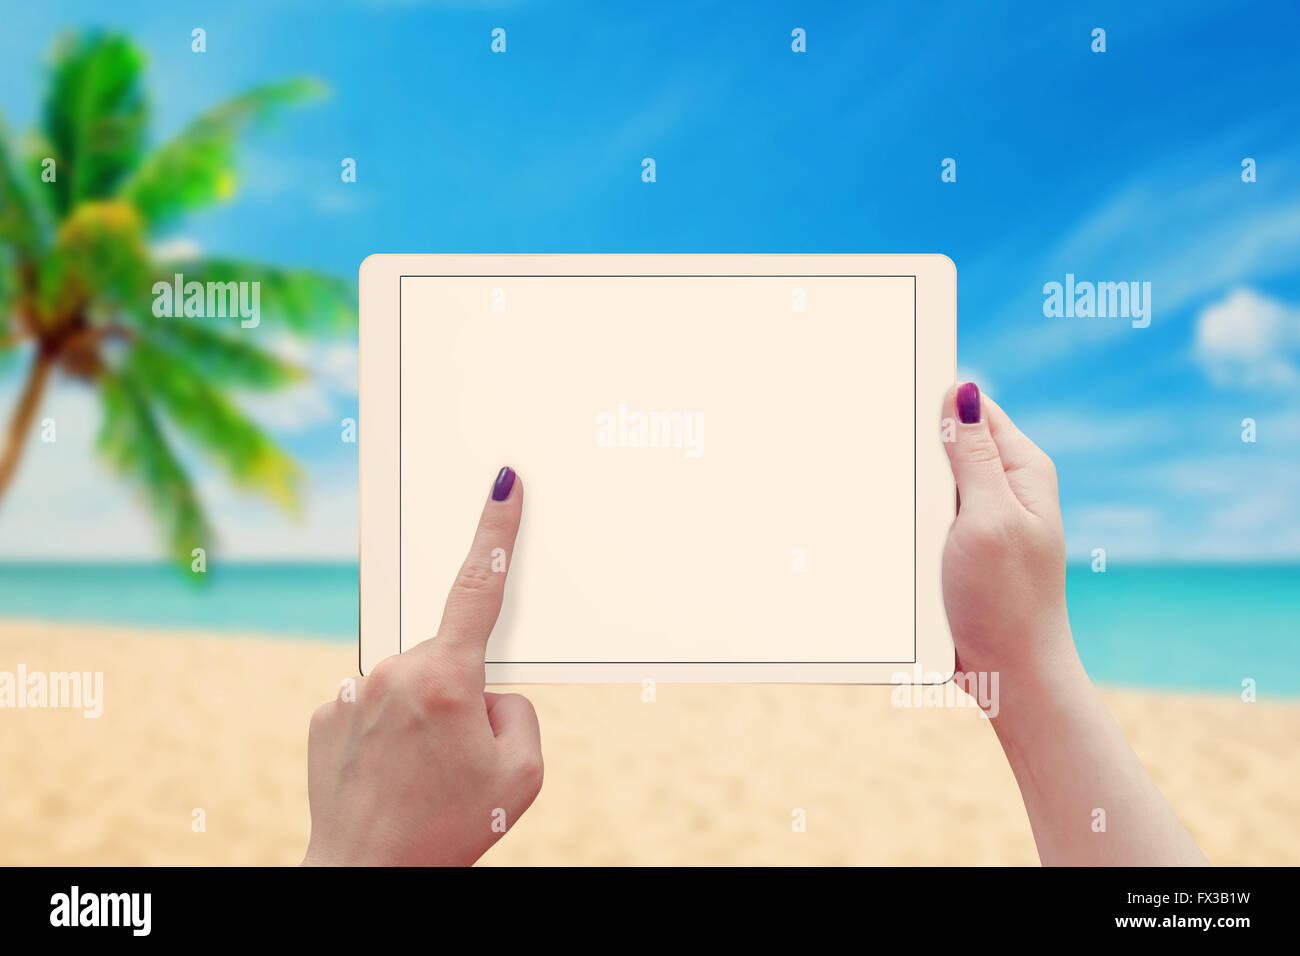 Woman work on tablet with blank screen. Summer time, beach in background. Stock Photo